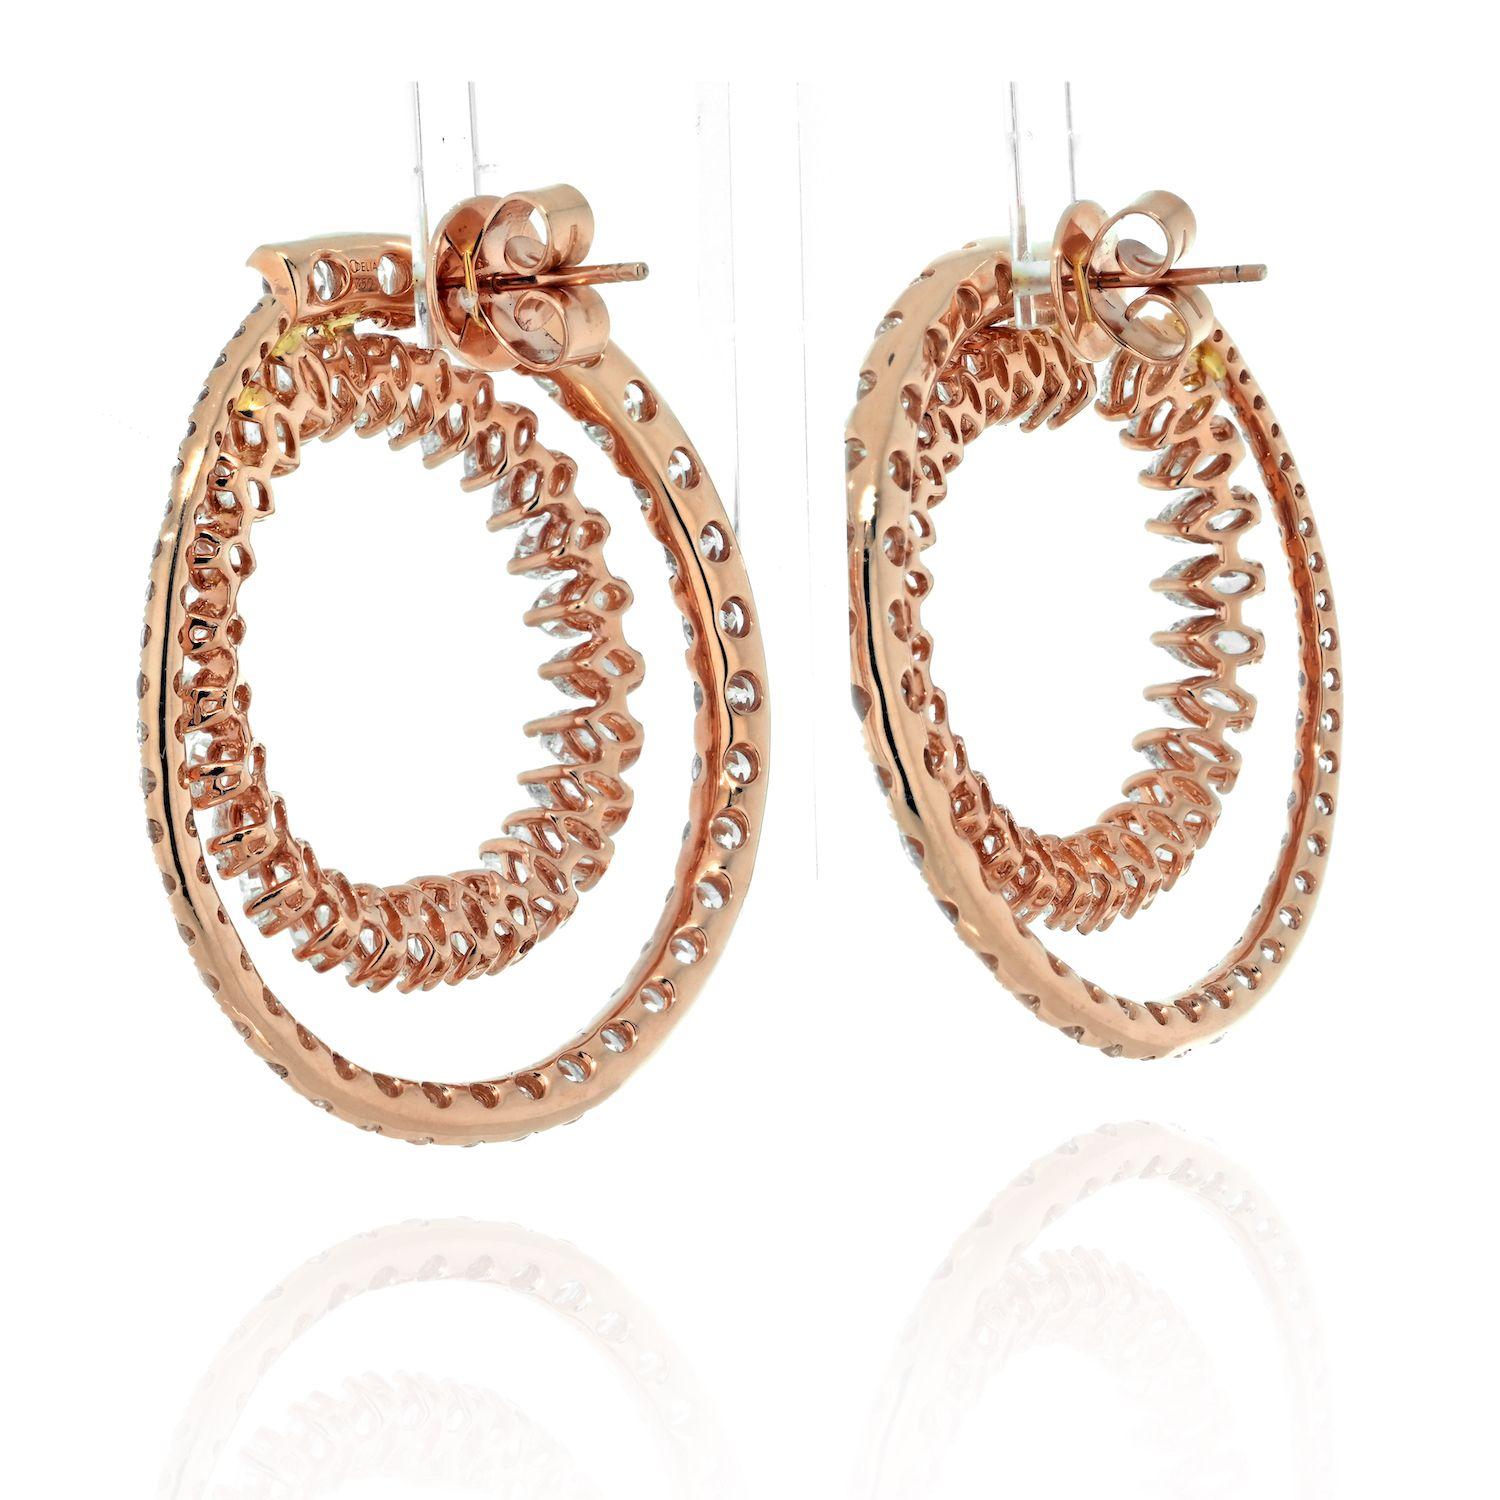 Quality 18K White Gold Open Circle Marquise Round Cut Diamond Hoop Earrings.
Designed for pierced ears. They look and feel luxurious on the ear. Perfect for every hair style and rose gold is just so trendy.
Diamond Carat Weight: estimated 15.00